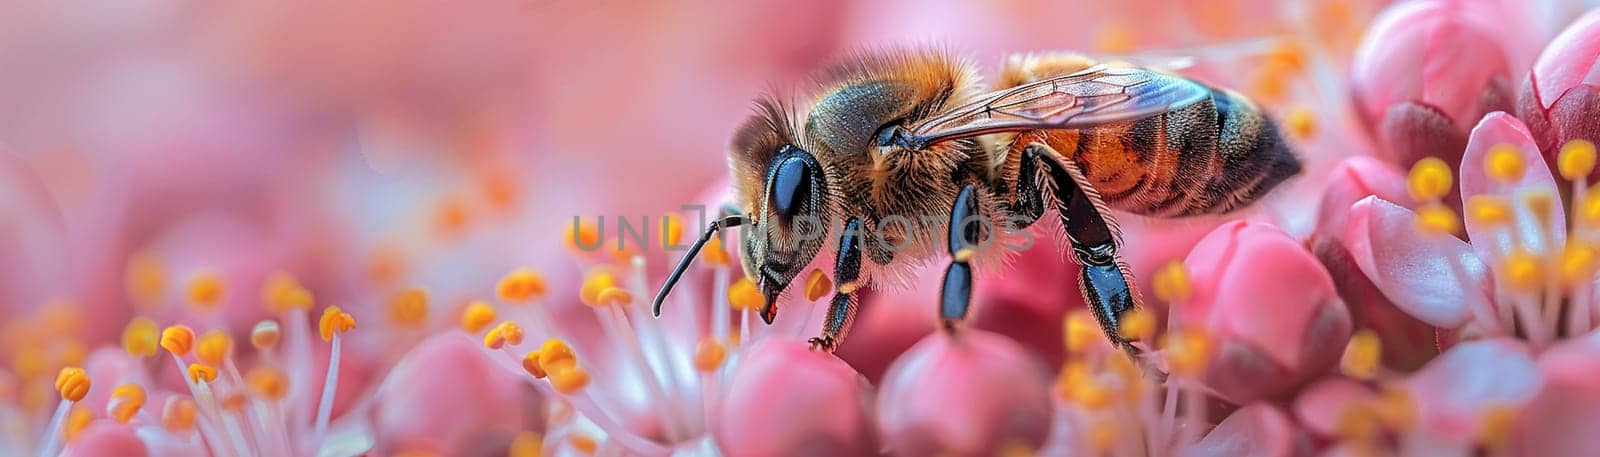 Close-up of a bee on a blooming flower, showcasing pollination and the beauty of spring